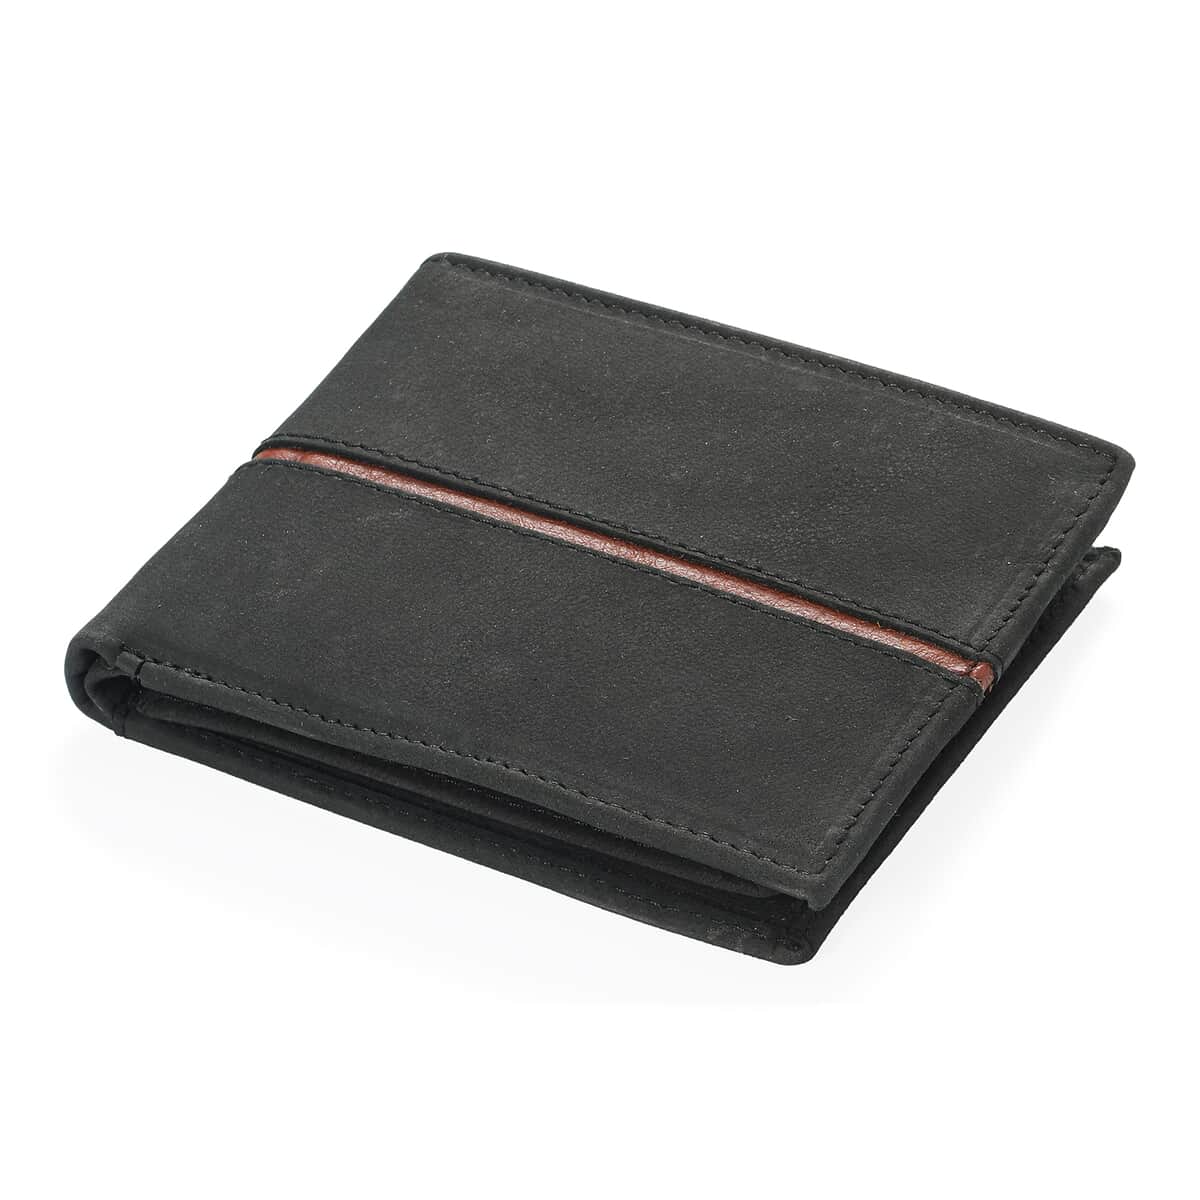 "UNION CODE Genuine Leather Bi Fold Men's Wallet (RFID Protected) SIZE: 4.25(L)x3.25(H) inches COLOR: Black" image number 0